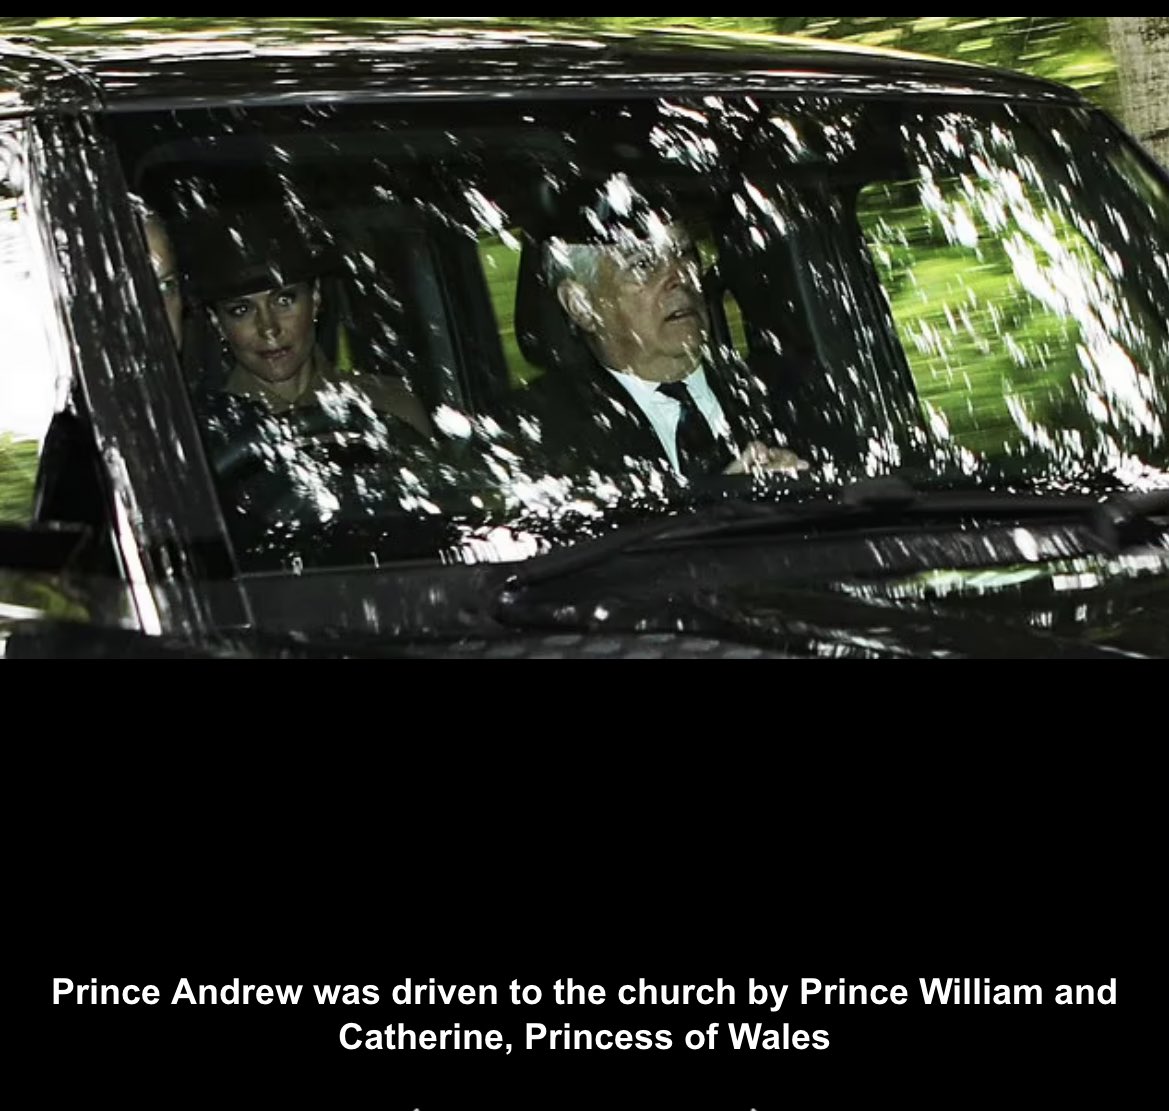 It's not a coincidence that someone leaked emails between Buckingham Palace and Home office discussing giving Prince Andrew his taxpayer funded security back, and a few days later the pedophile Prince is driven to church by Prince William and Kate Middleton. 😏